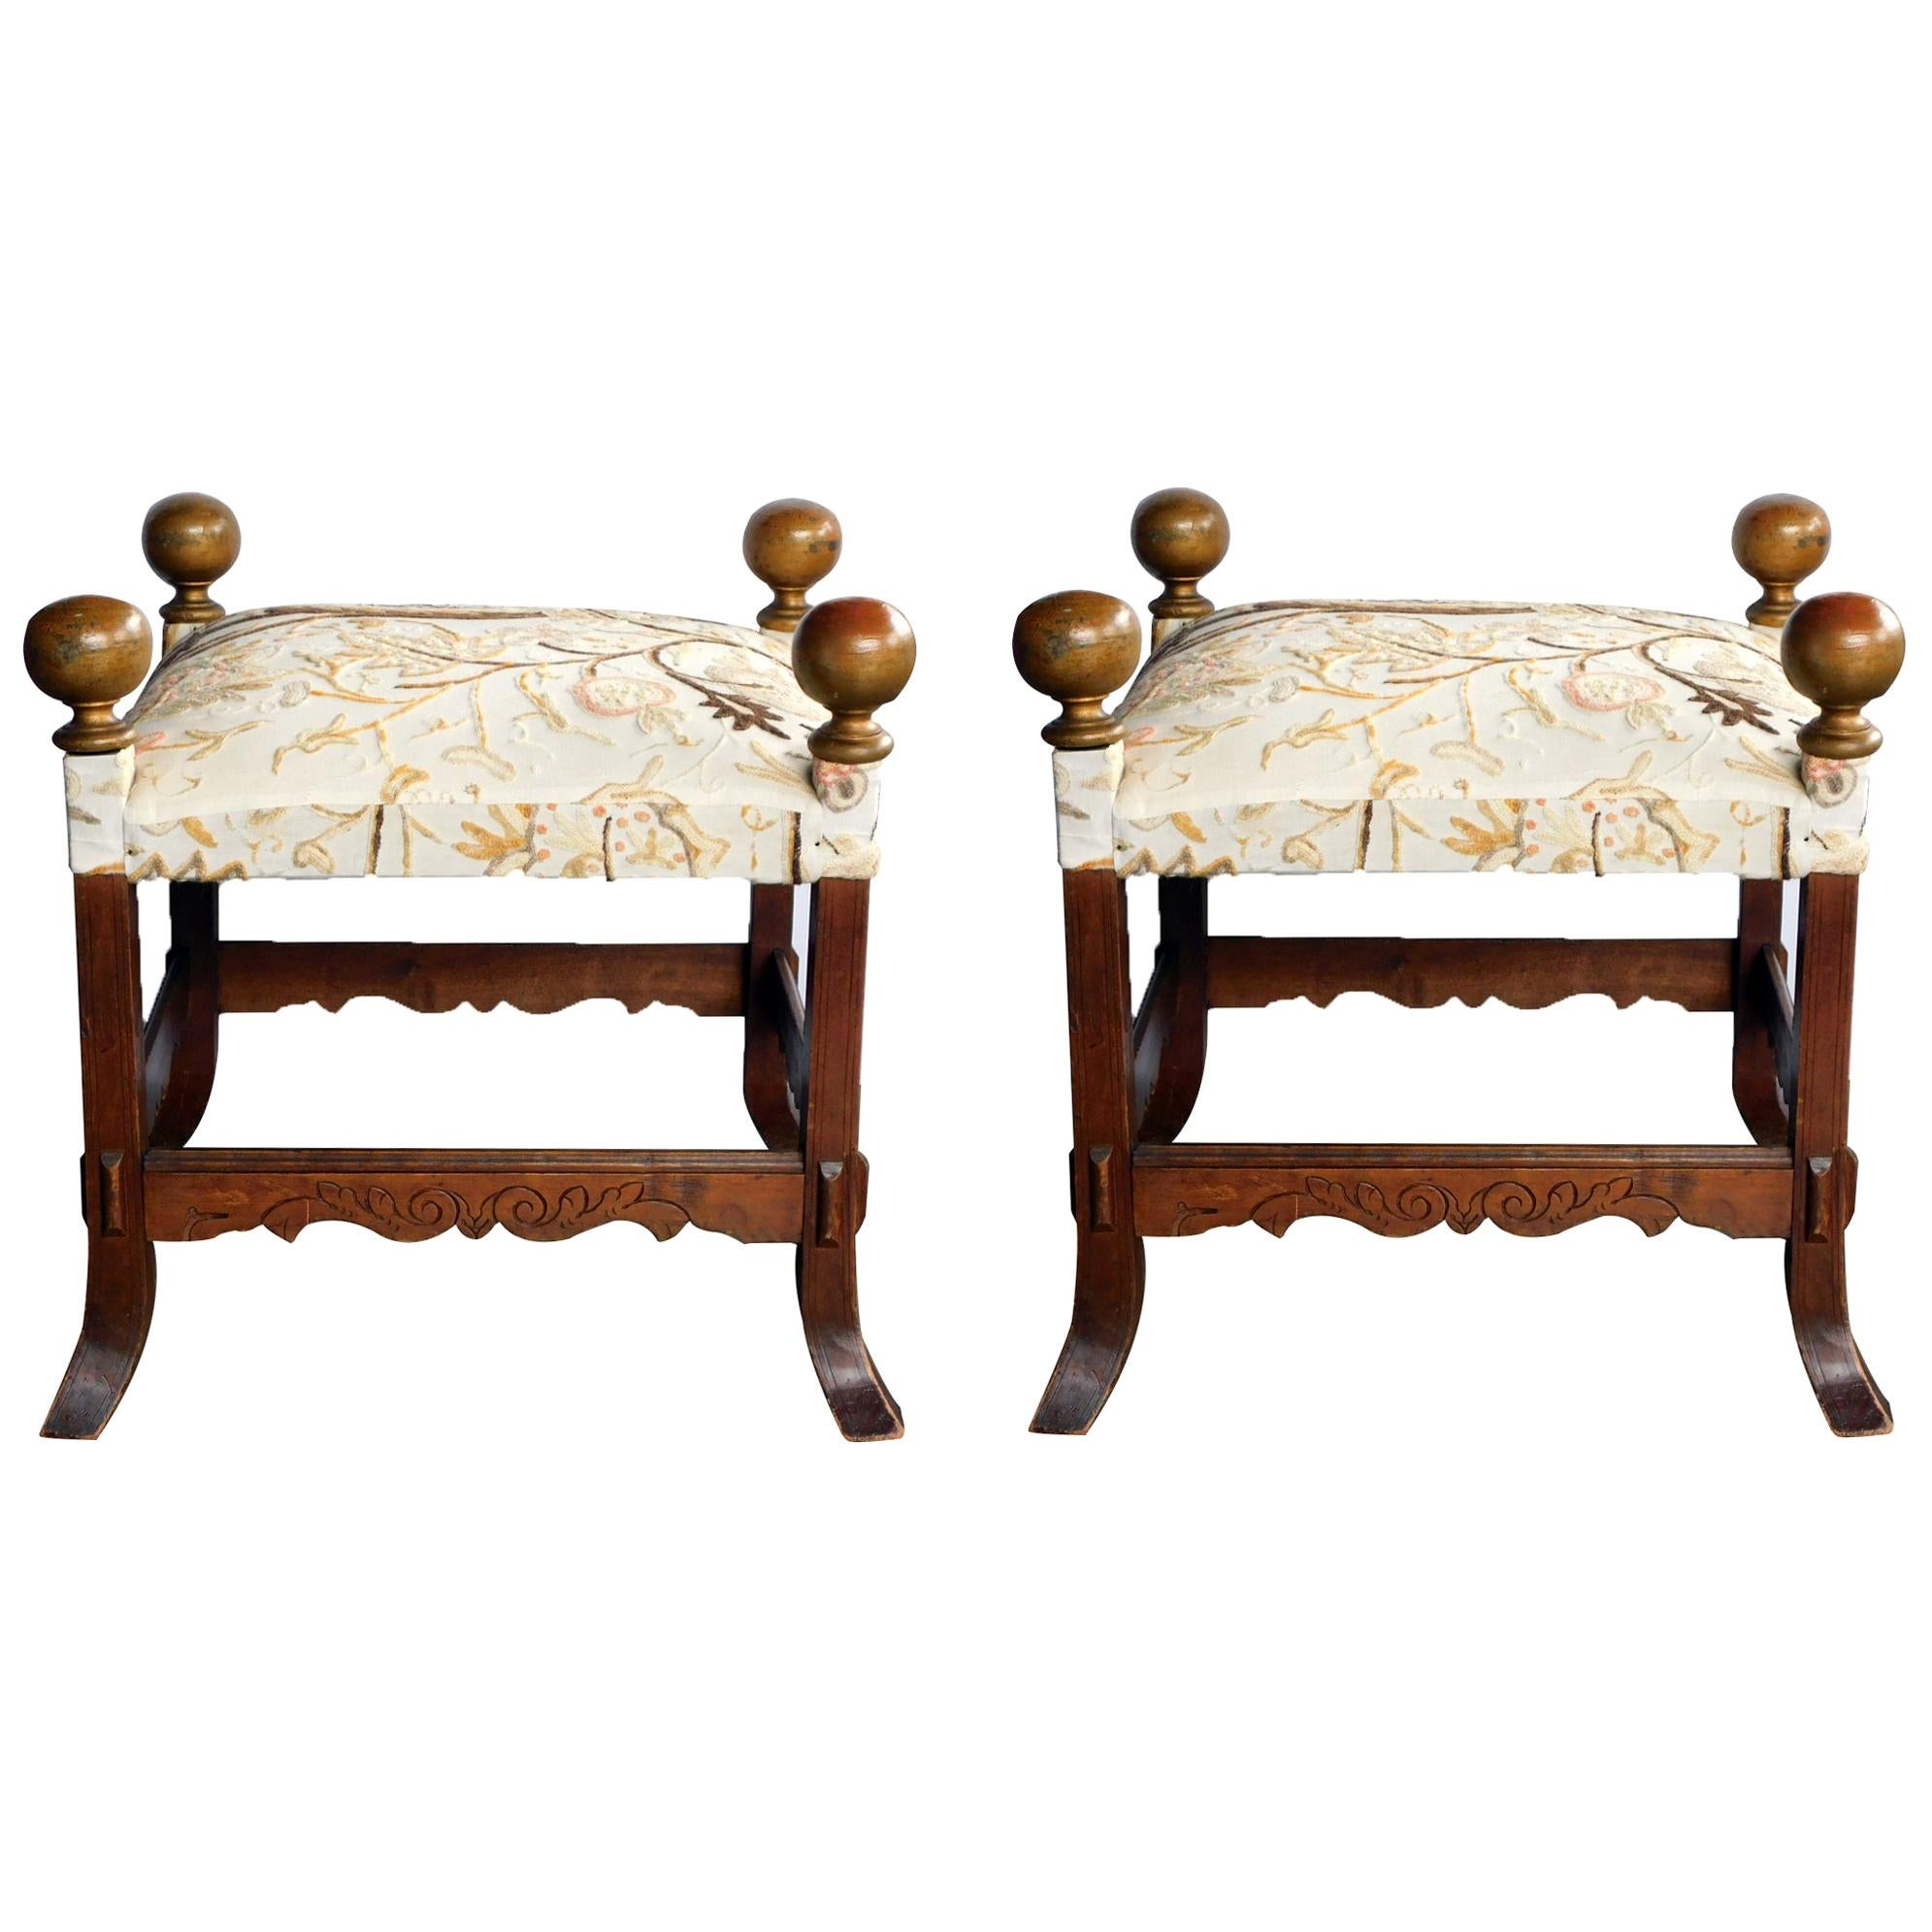 A Large Pair of Arts and Crafts Style Square Stools